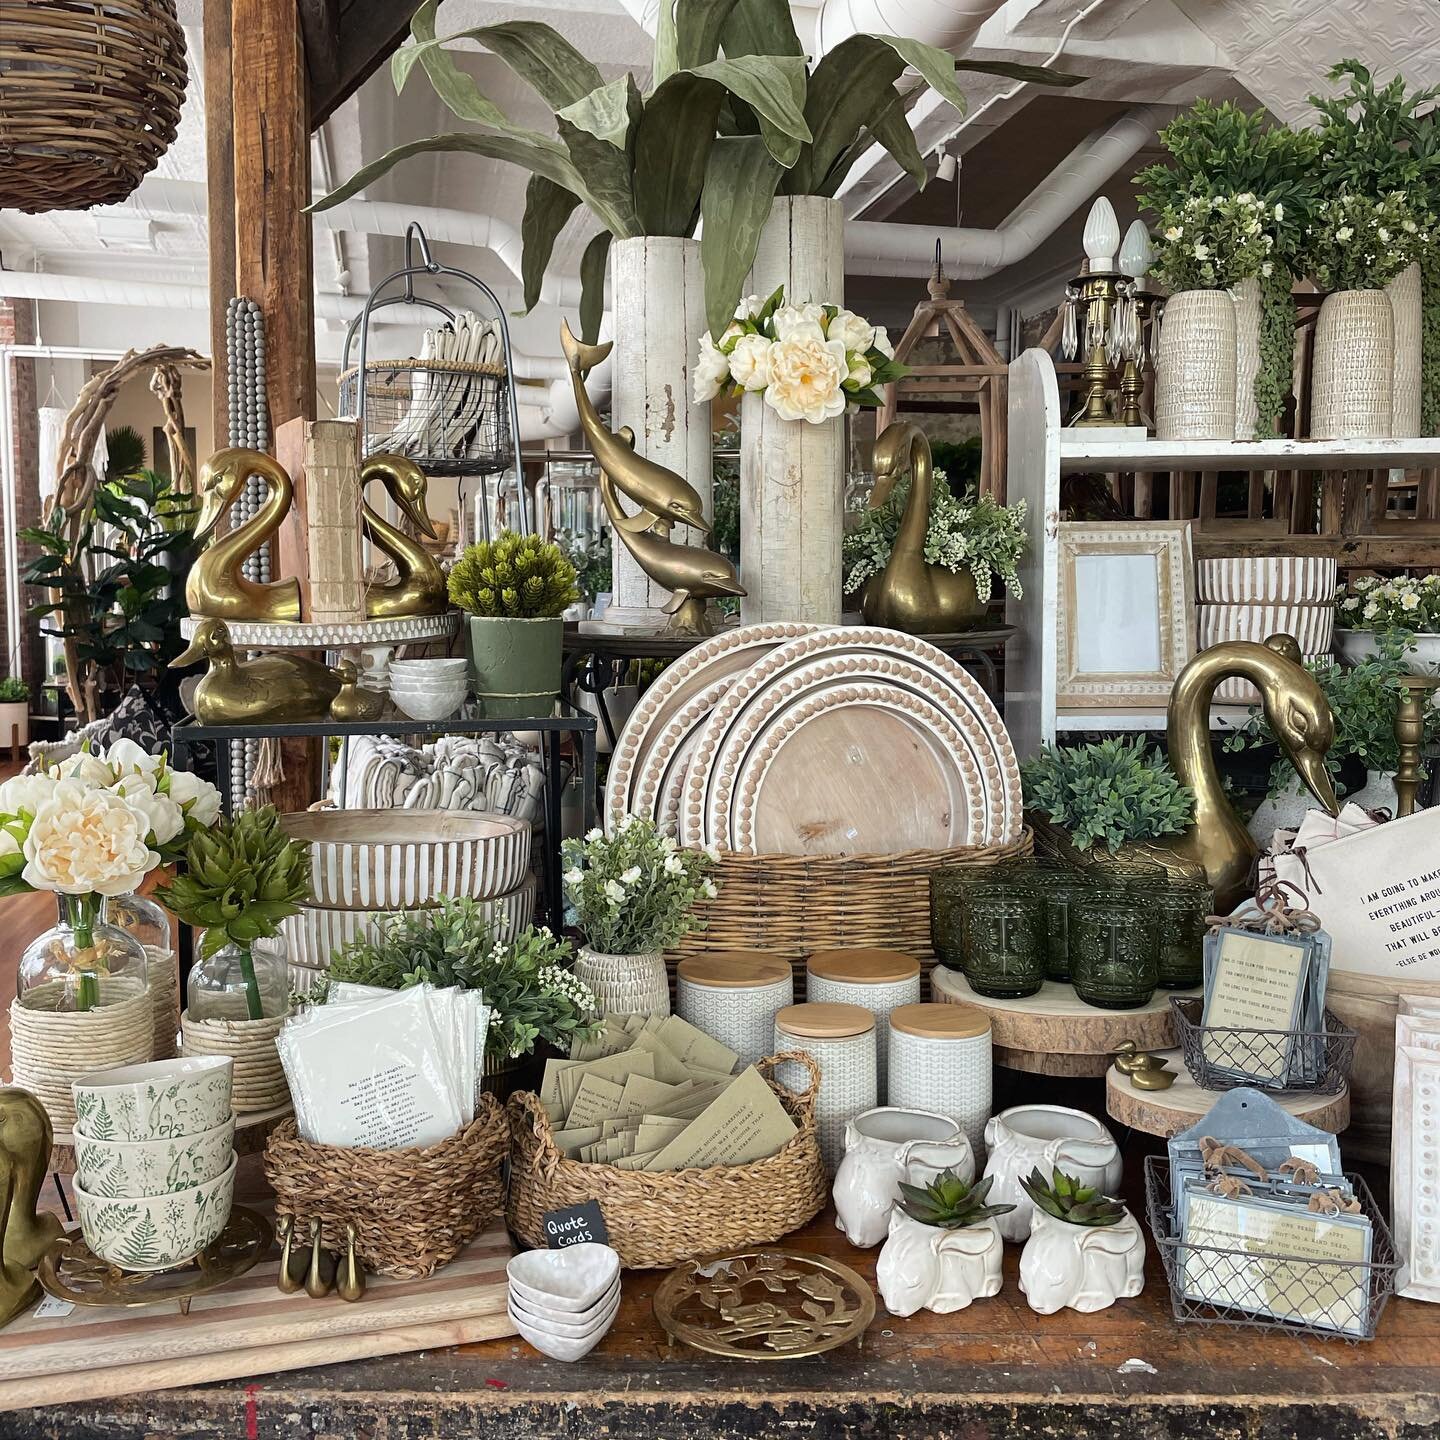 Happy Wednesday friends✨We are back open for the week!! The store is full of new displays, new vintage, and new artwork, come see for yourself today 11-5 😊 

#bluebirdhomedecor #homedecor #shopsmall #farmhousedecor #farmhousestyle #vintagestyle #neu